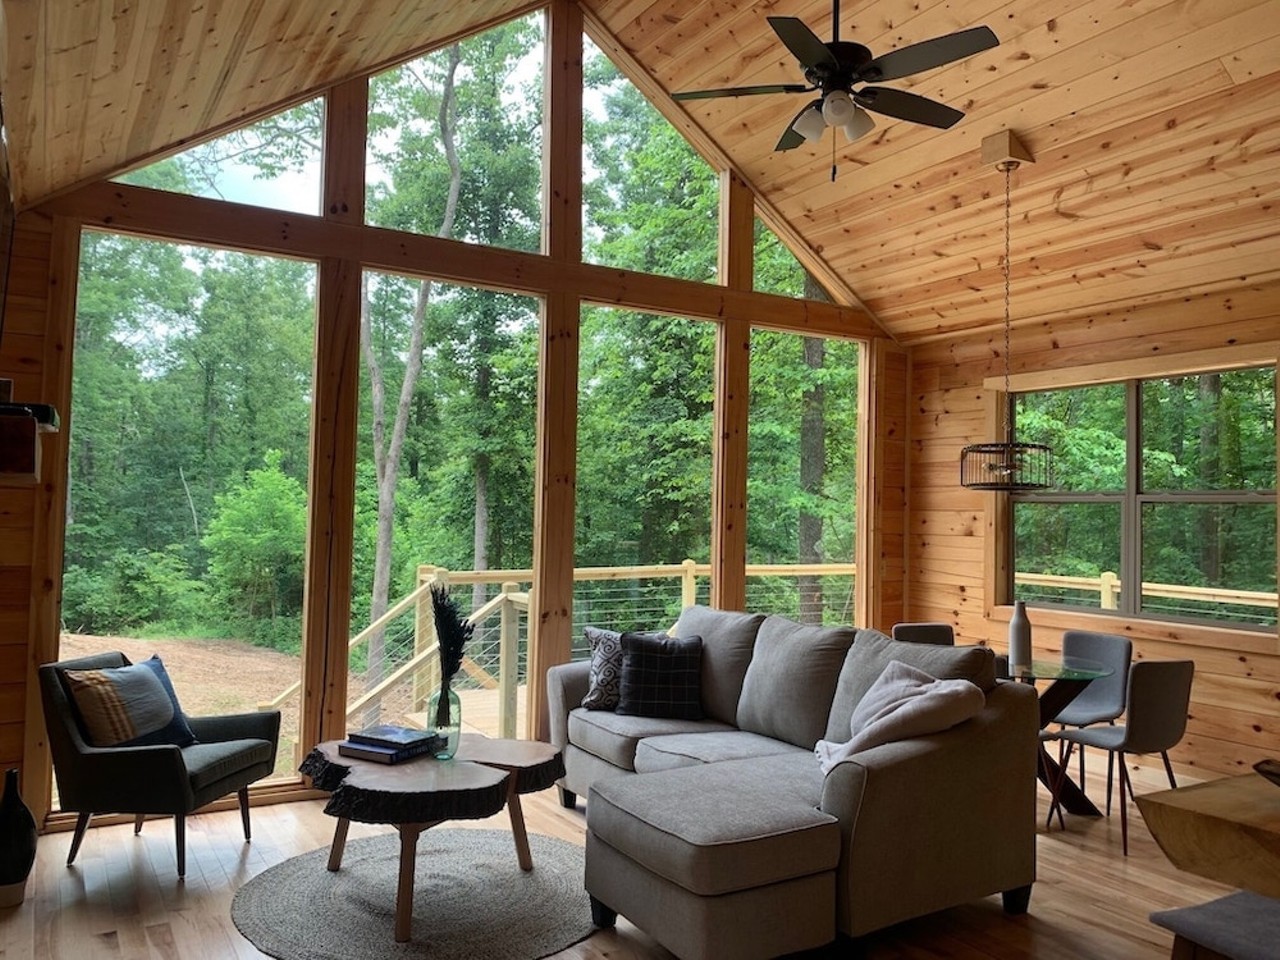 Fern Haven Cabin
Hocking Hills, Ohio
From $239/night | Hosts 4 guests
“Escape to this brand new build - a modern cabin with everything you need for a luxurious getaway in the woods. A short 10-20 minute drive to the main Hocking Hills attractions - Ash Cave, Cedar Falls, and Old Man's Cave, this cabin is a perfect place to unwind with your loved one. Nestled on 44 acres and 2 other cabins you'll be able to enjoy trails on the property as well. This cabin was designed with modern touches and a wall of windows to bring nature to you!” — Vrbo